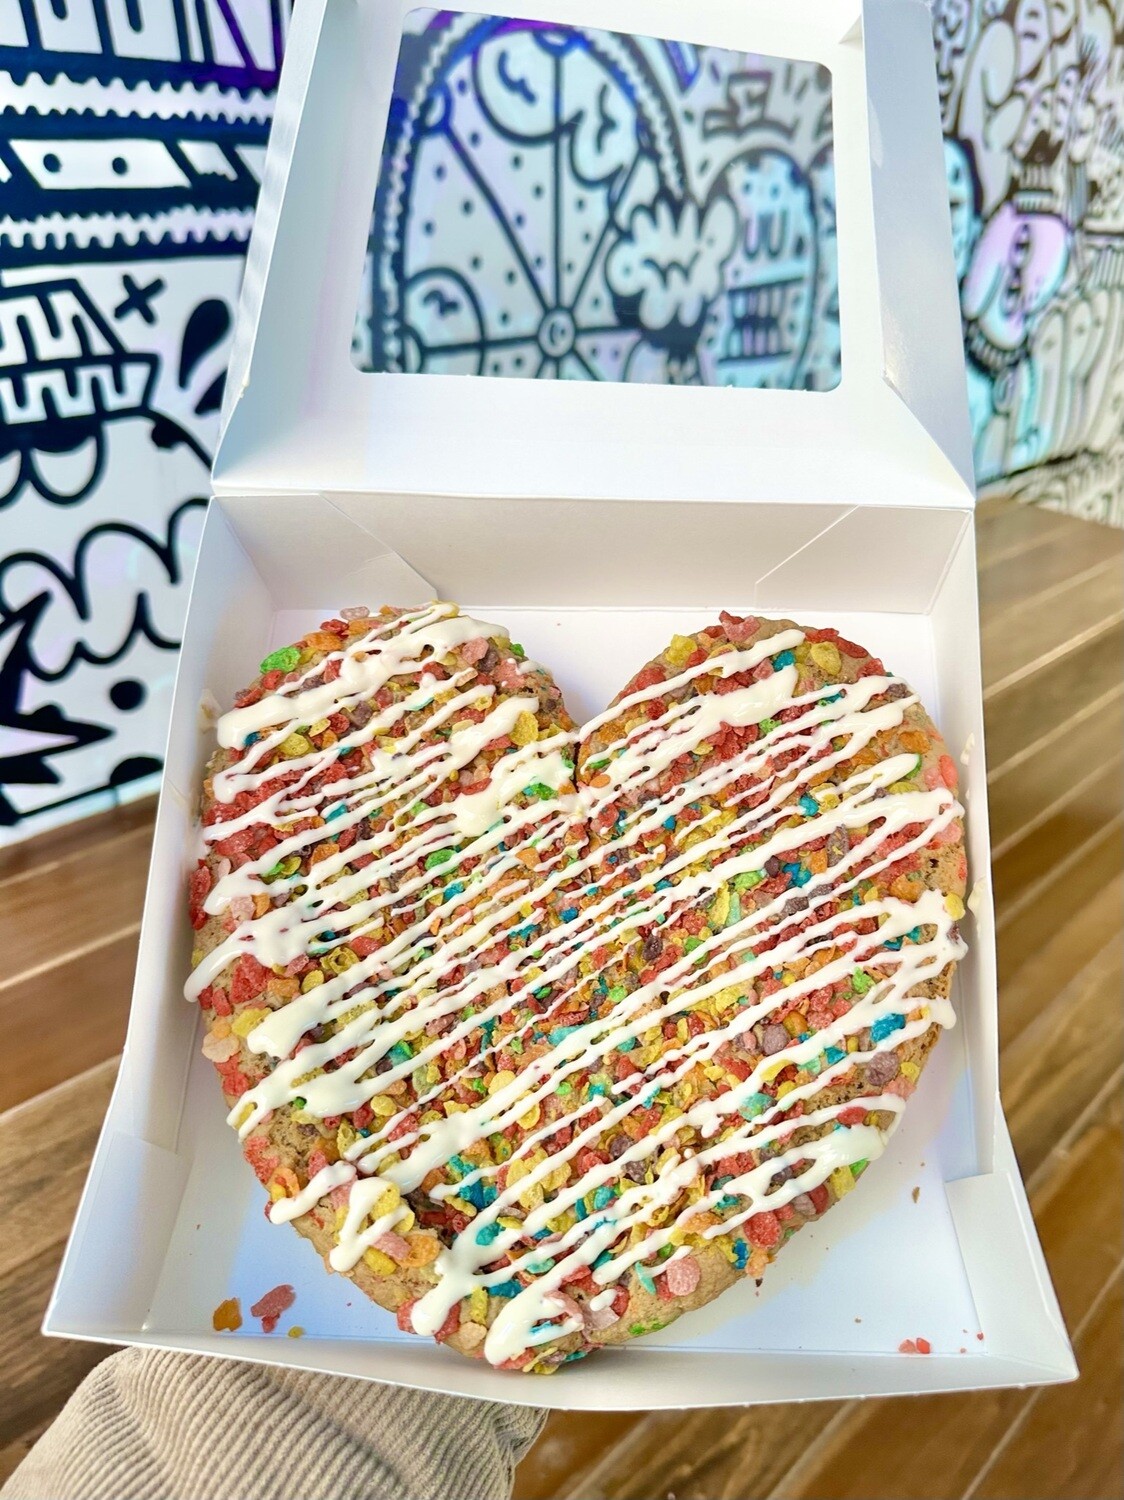 PREORDER - 9" Heart Shaped Cookie Cake